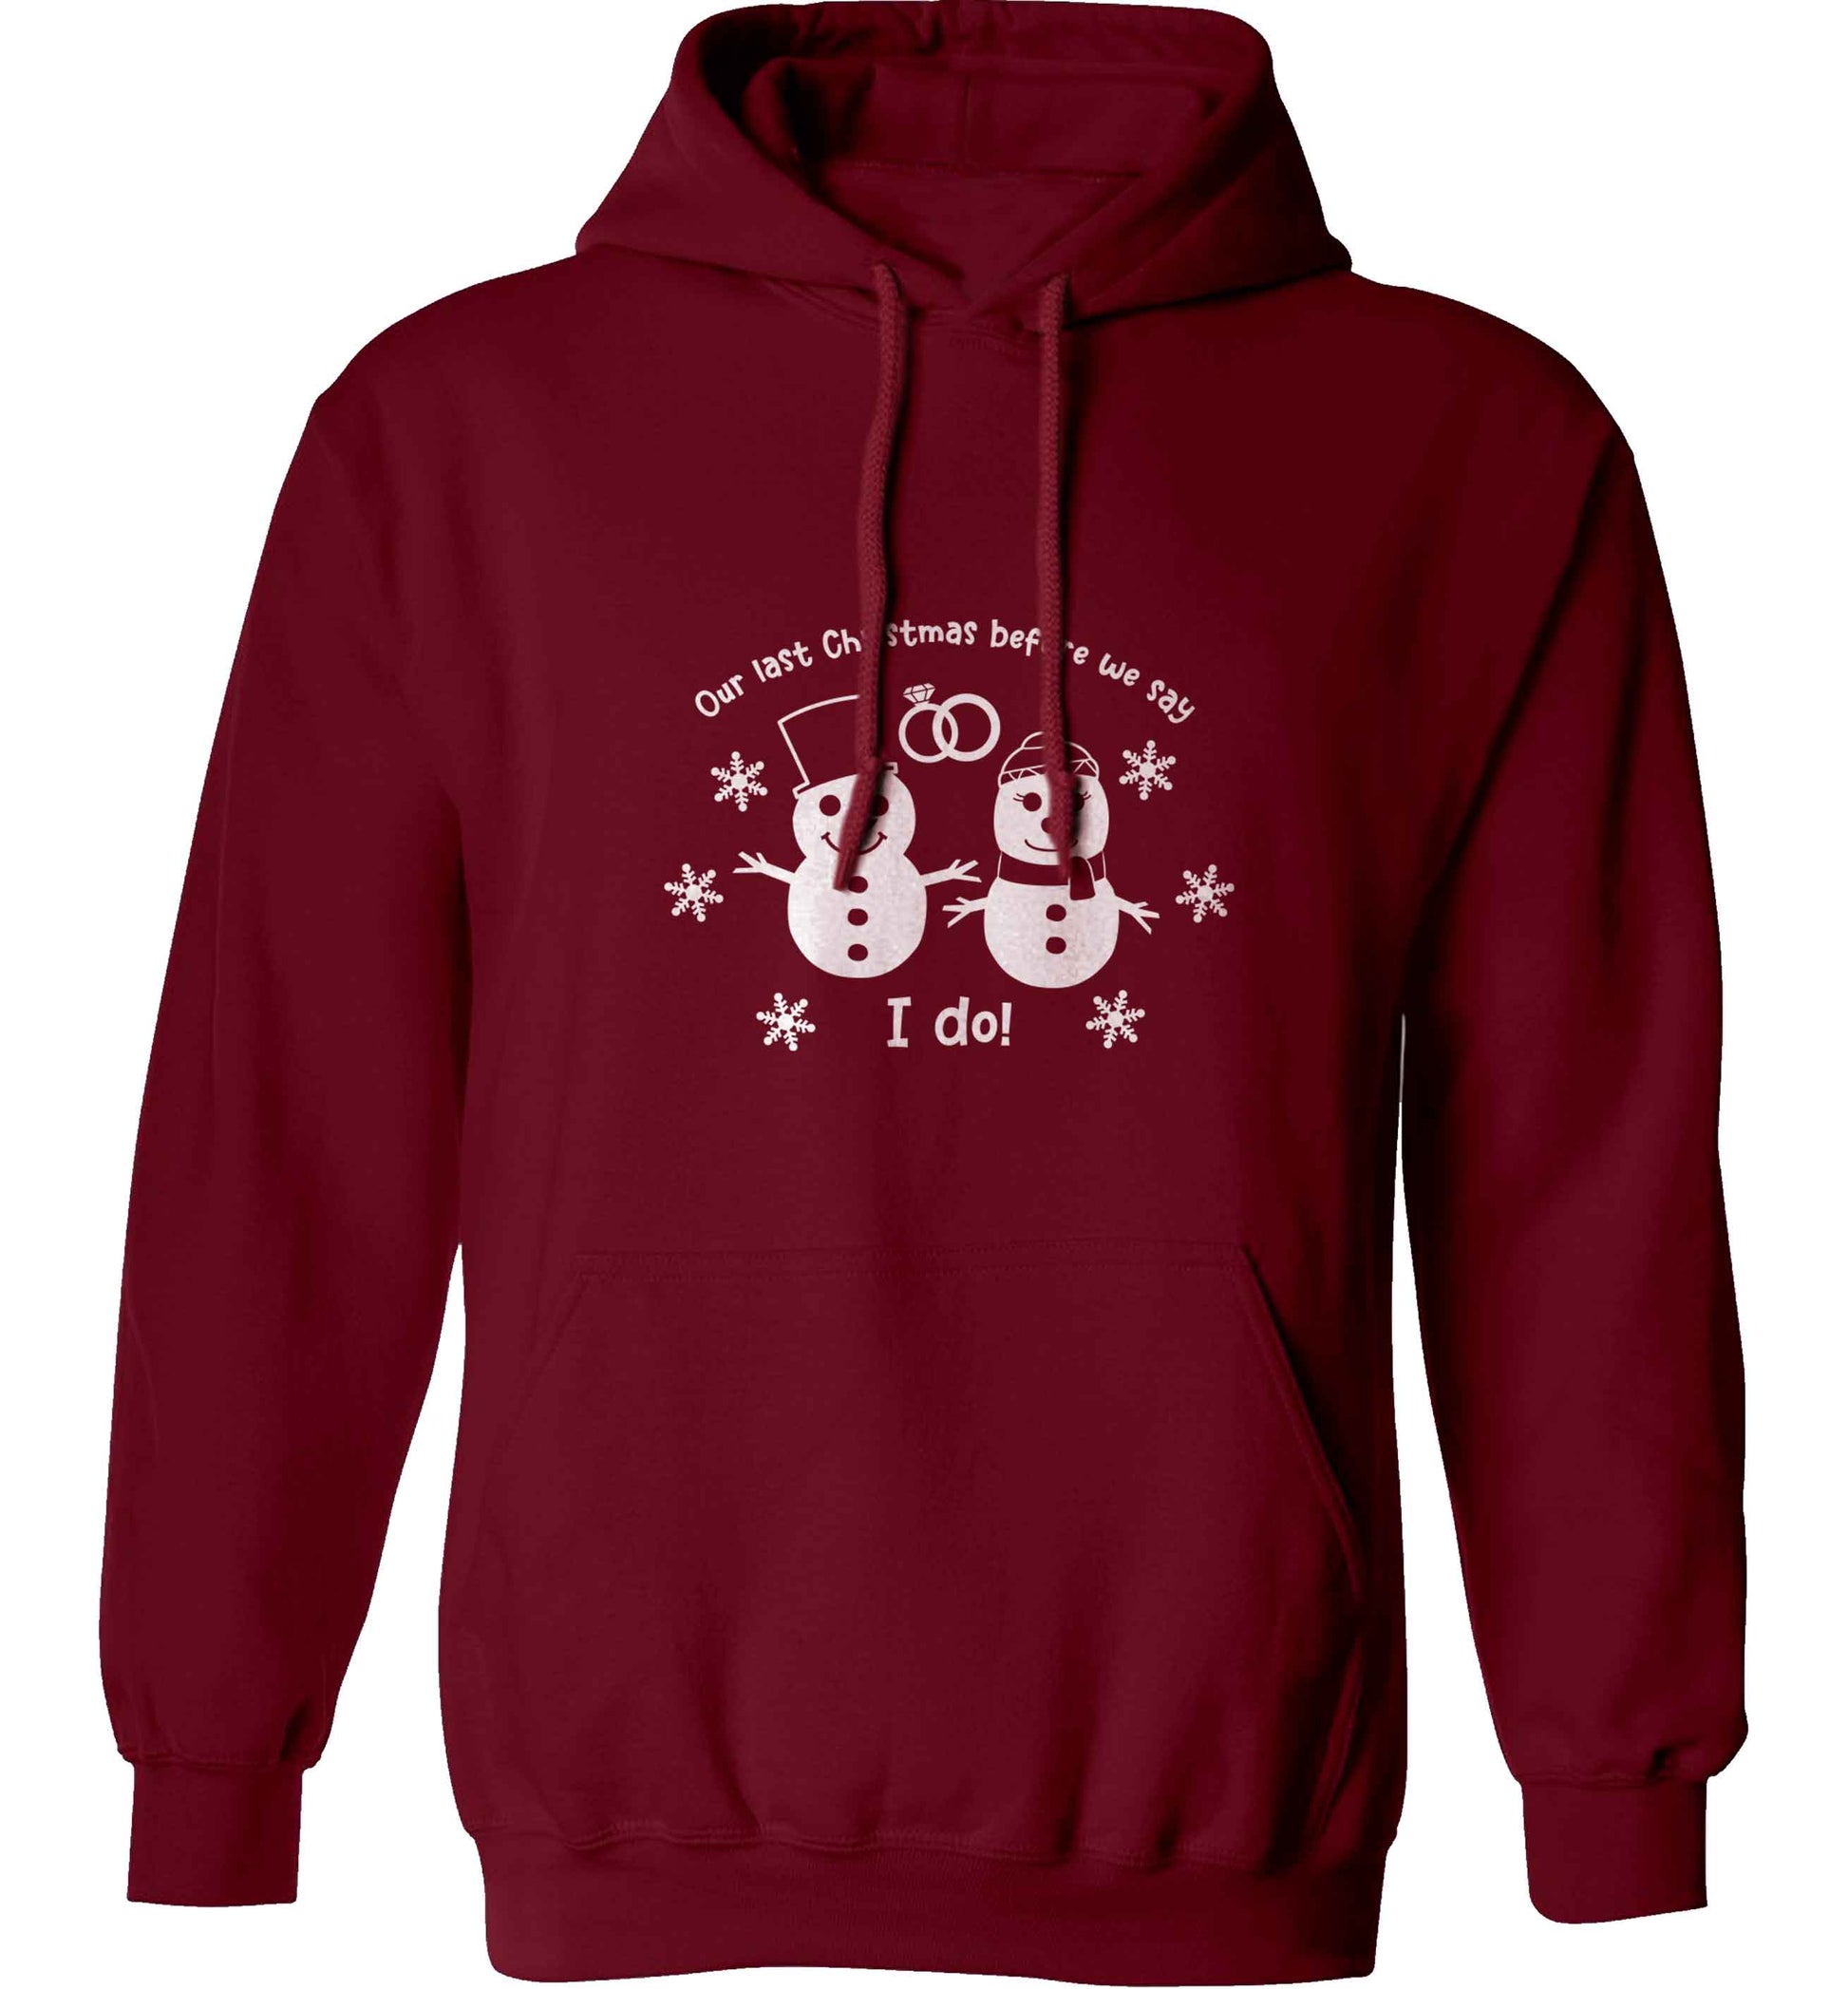 Last Christmas before we say I do adults unisex maroon hoodie 2XL